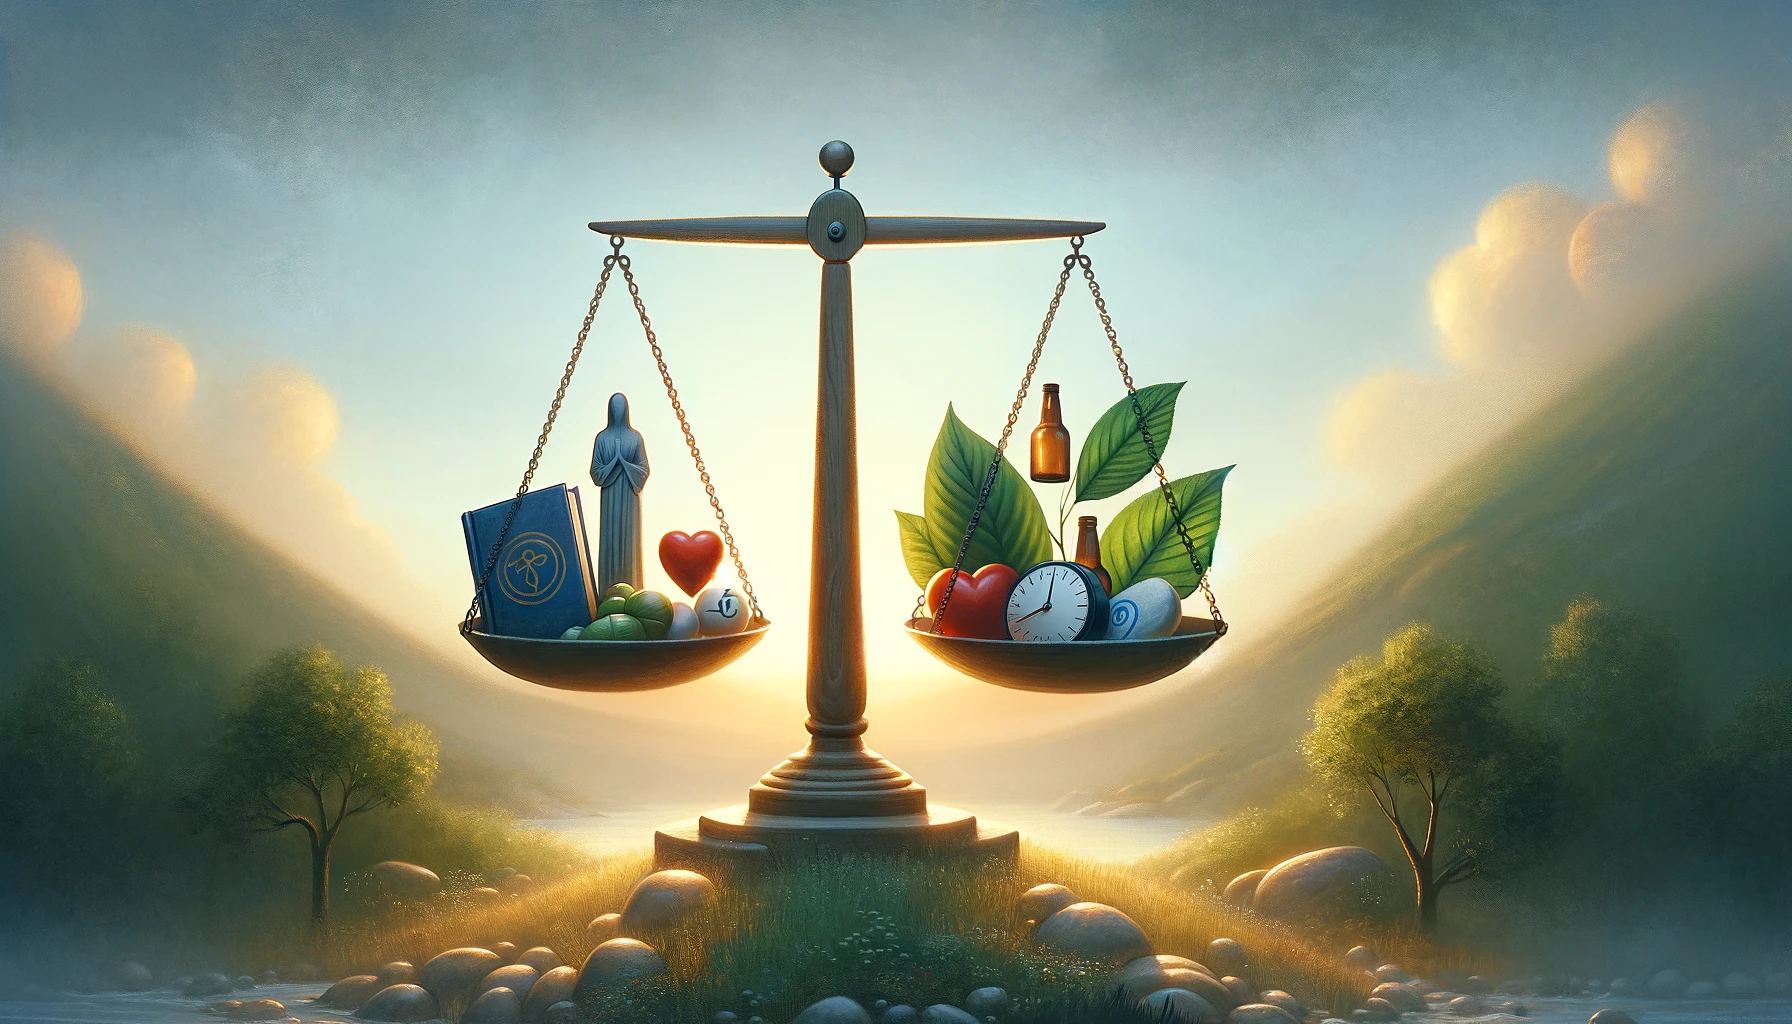 Illustrate the concept of setting priorities in recovery. Visualize a balance scale in a serene, natural setting, with one side holding symbols of rec